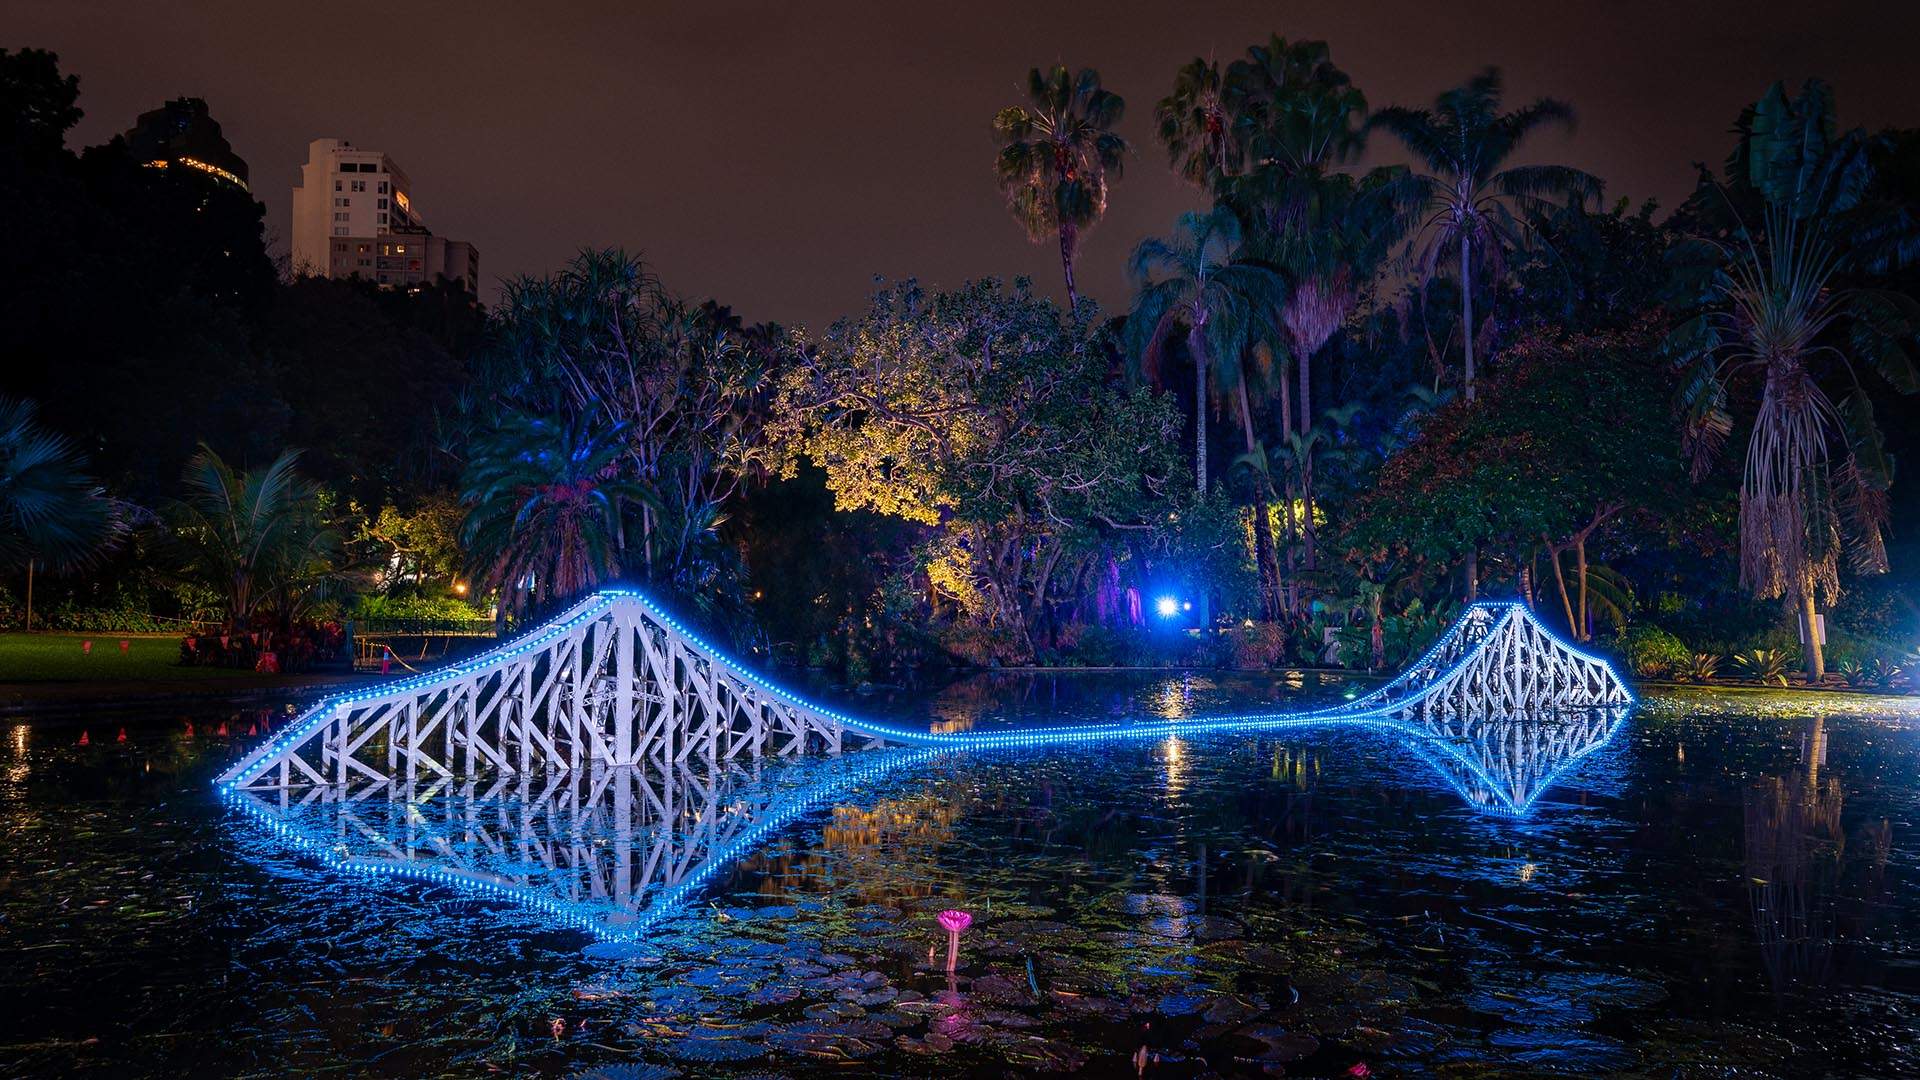 Brisbane's Glowing After-Dark Festival Botanica Will Light Up the City Botanic Gardens Again in May